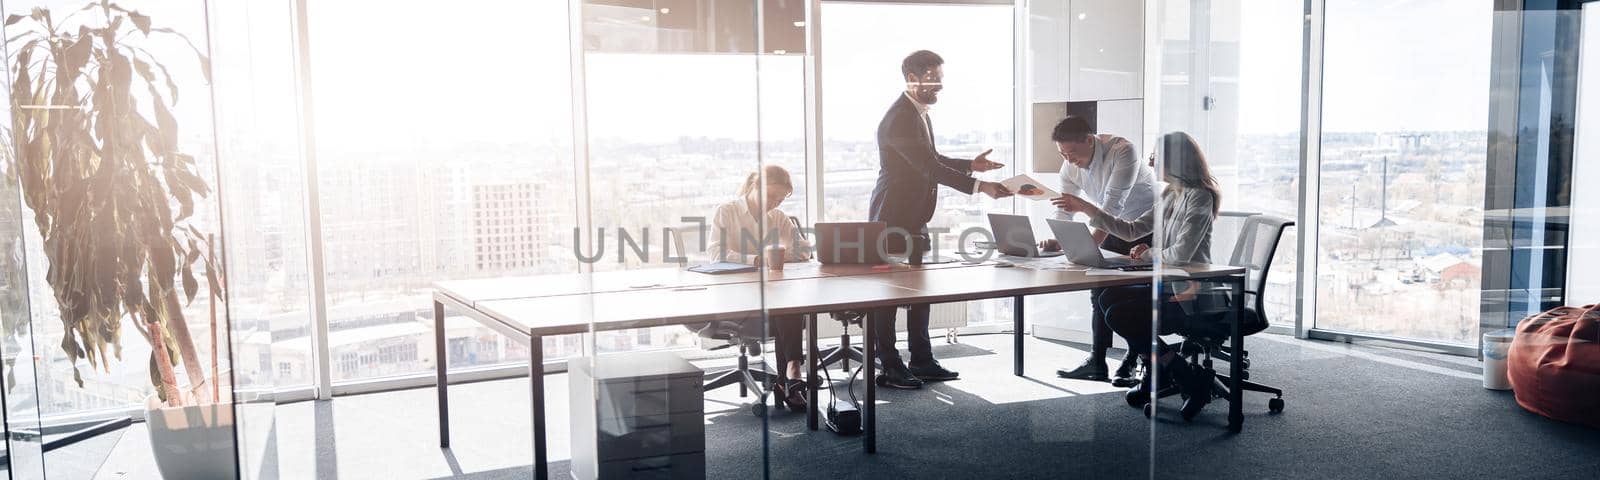 People standing near table, team of young businessmen working together in office. Blurred background